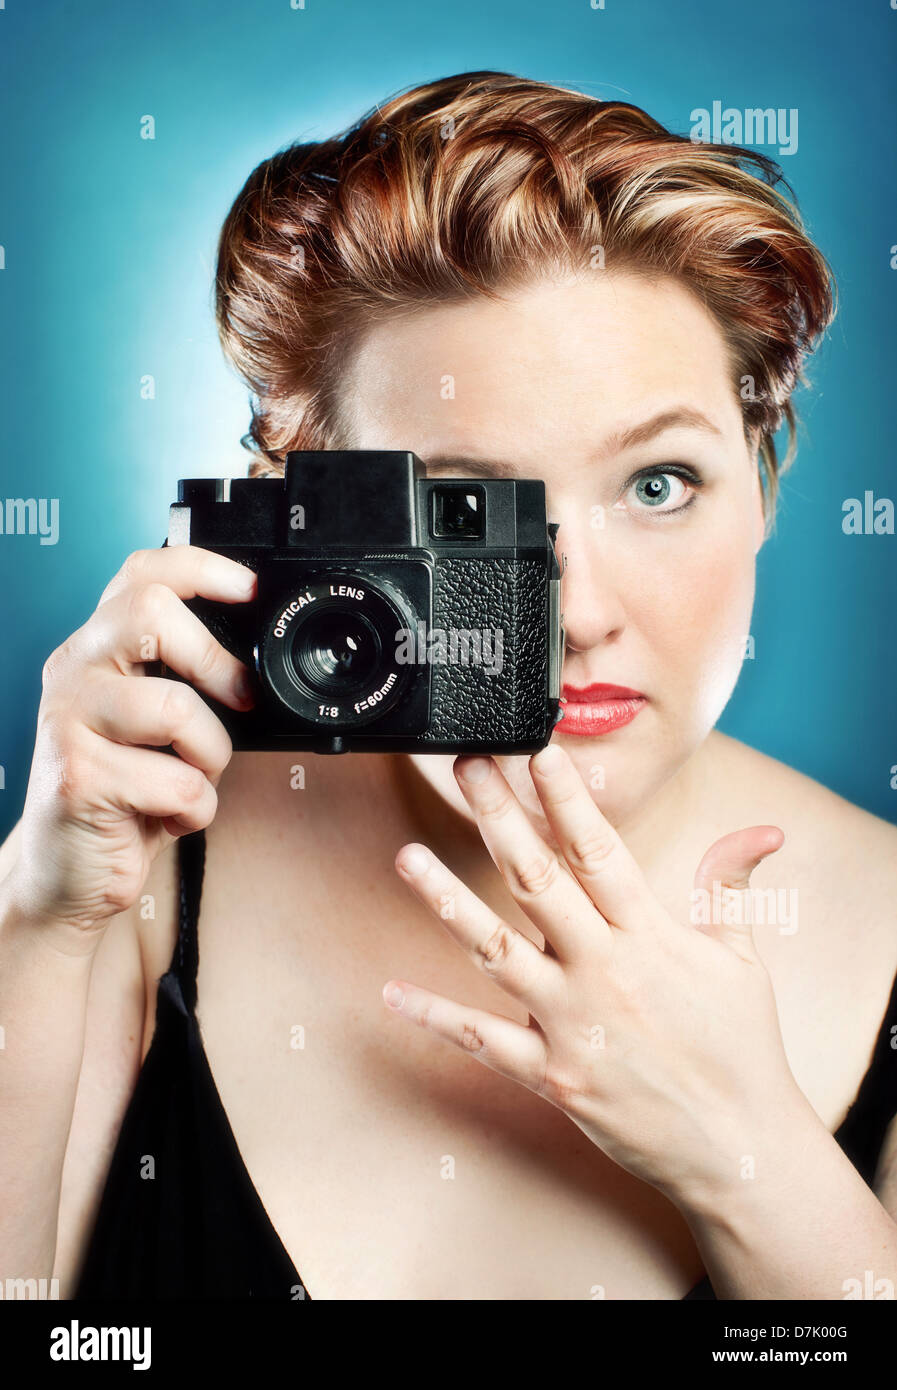 Portrait of young woman taking a picture with a toy camera in studio against blue backdrop Stock Photo